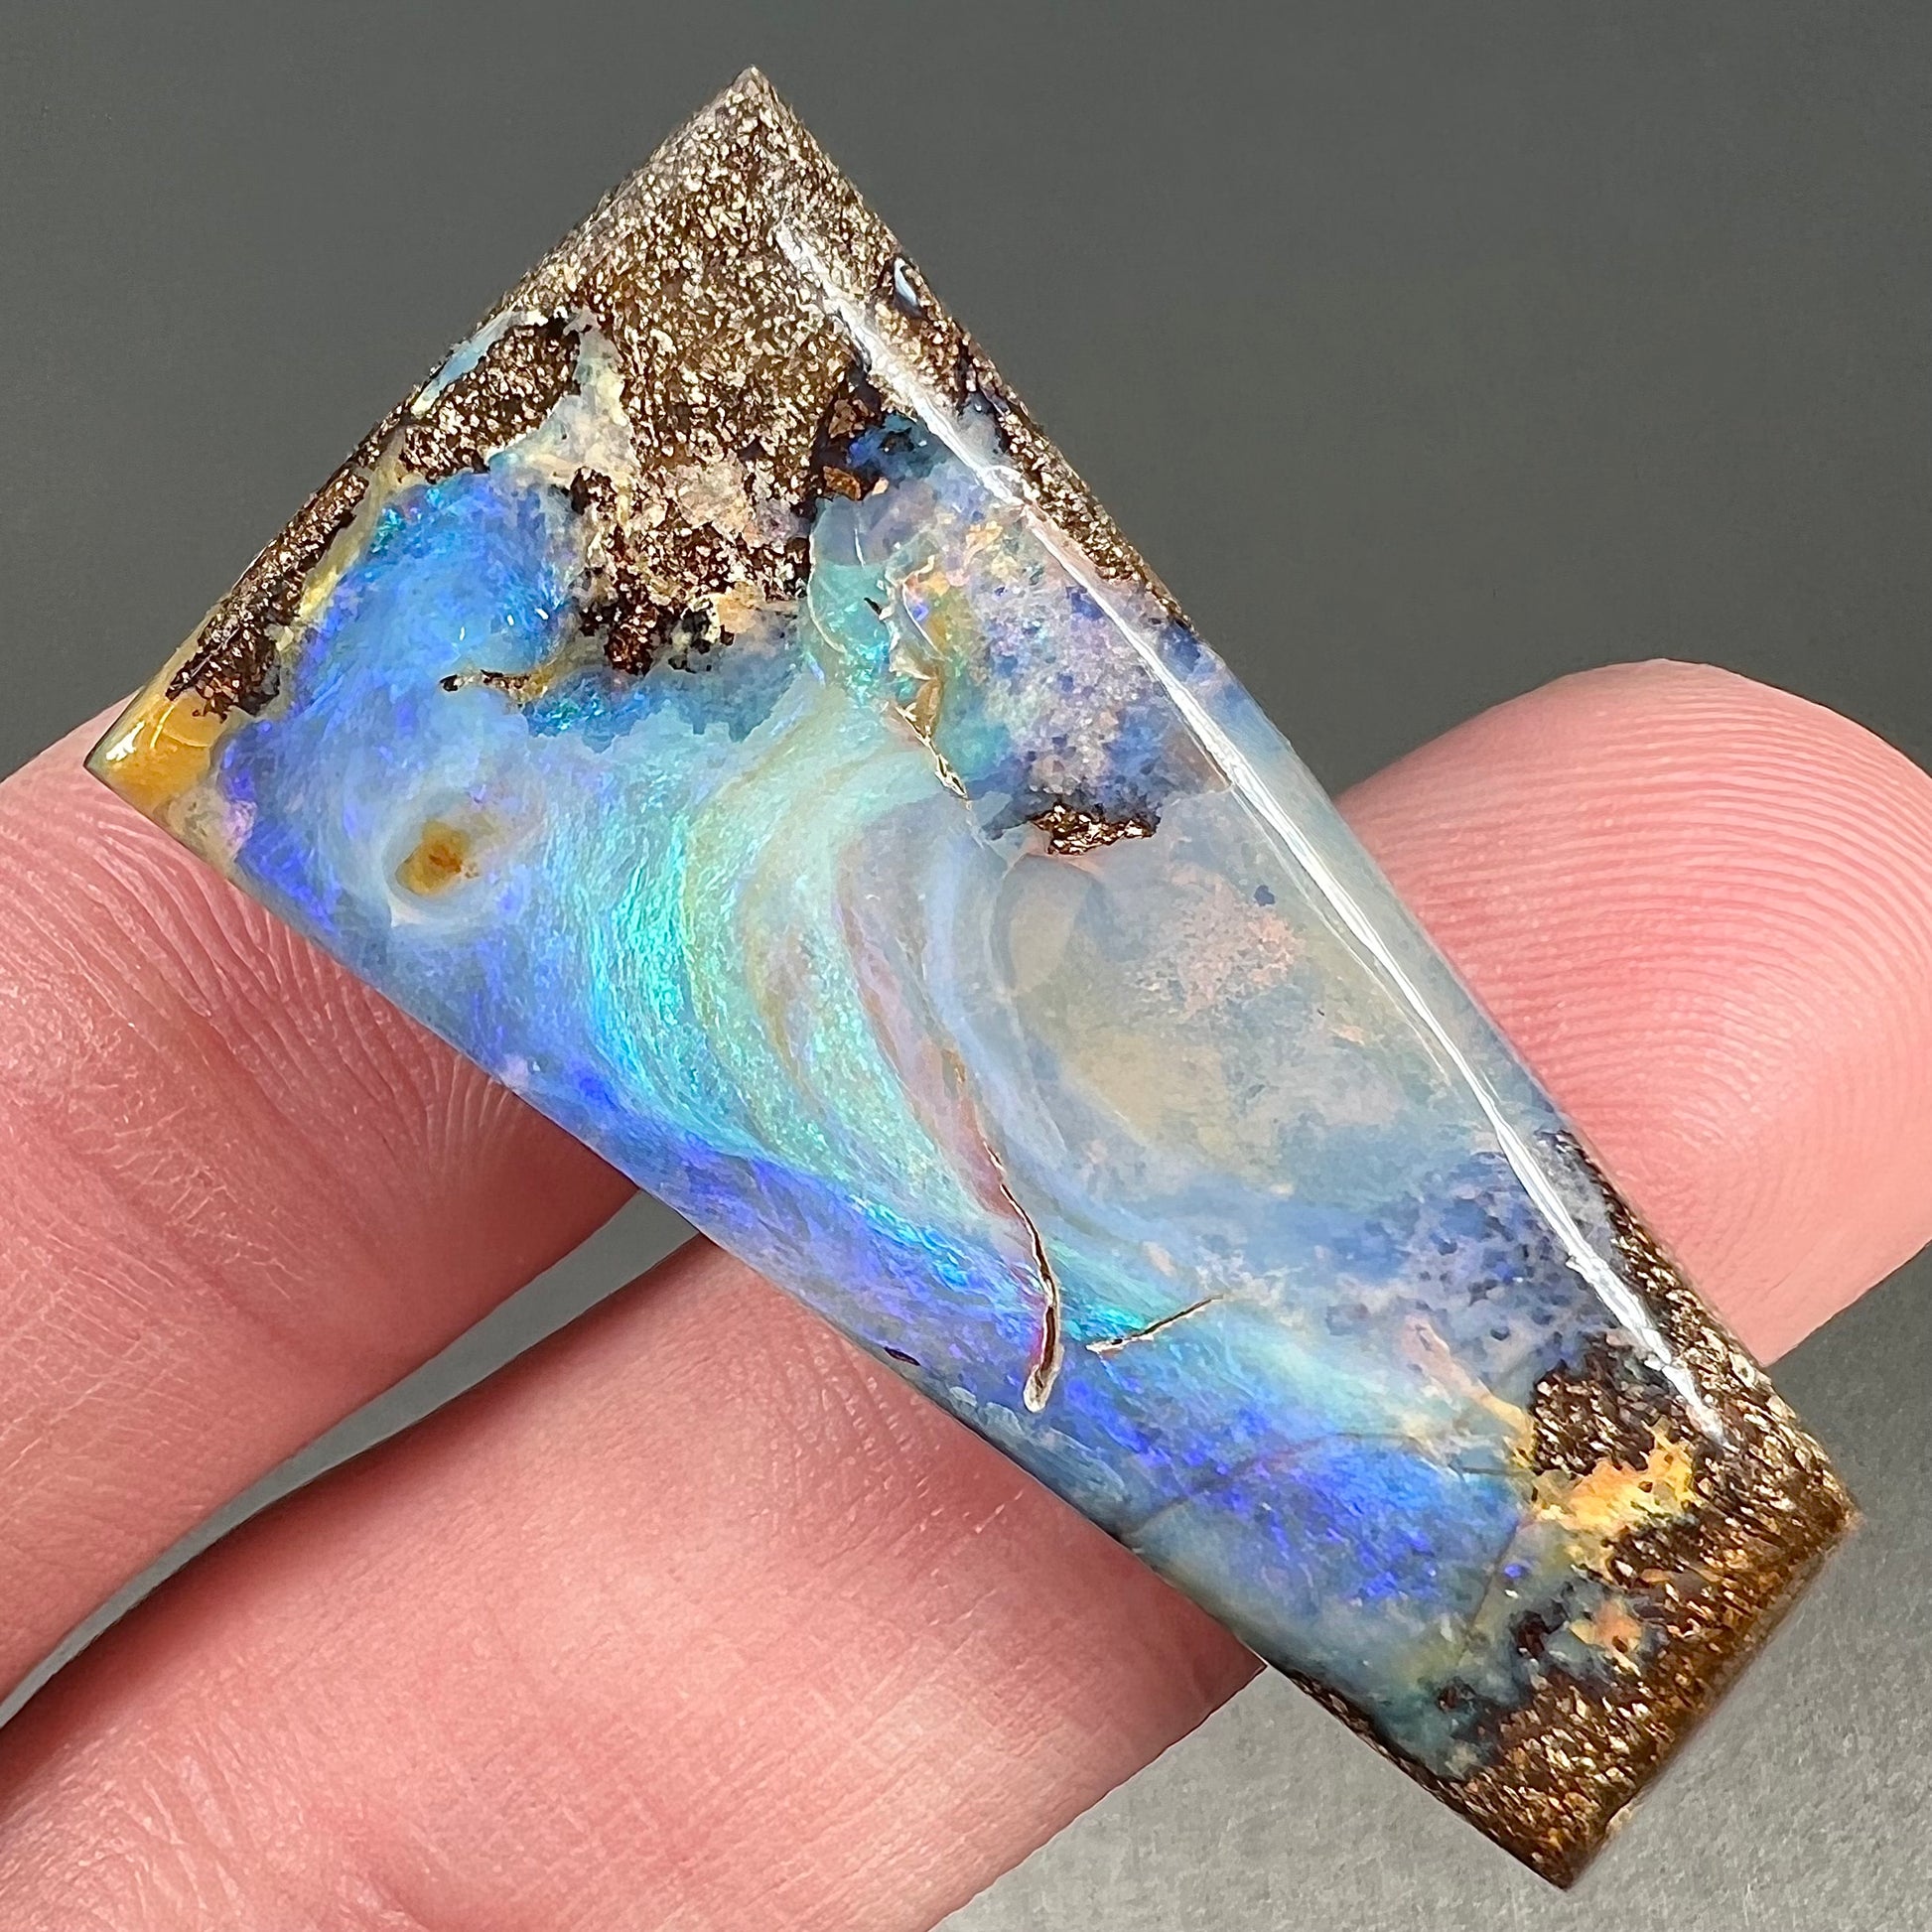 A loose Quilpie boulder opal stone from Queensland, Australia.